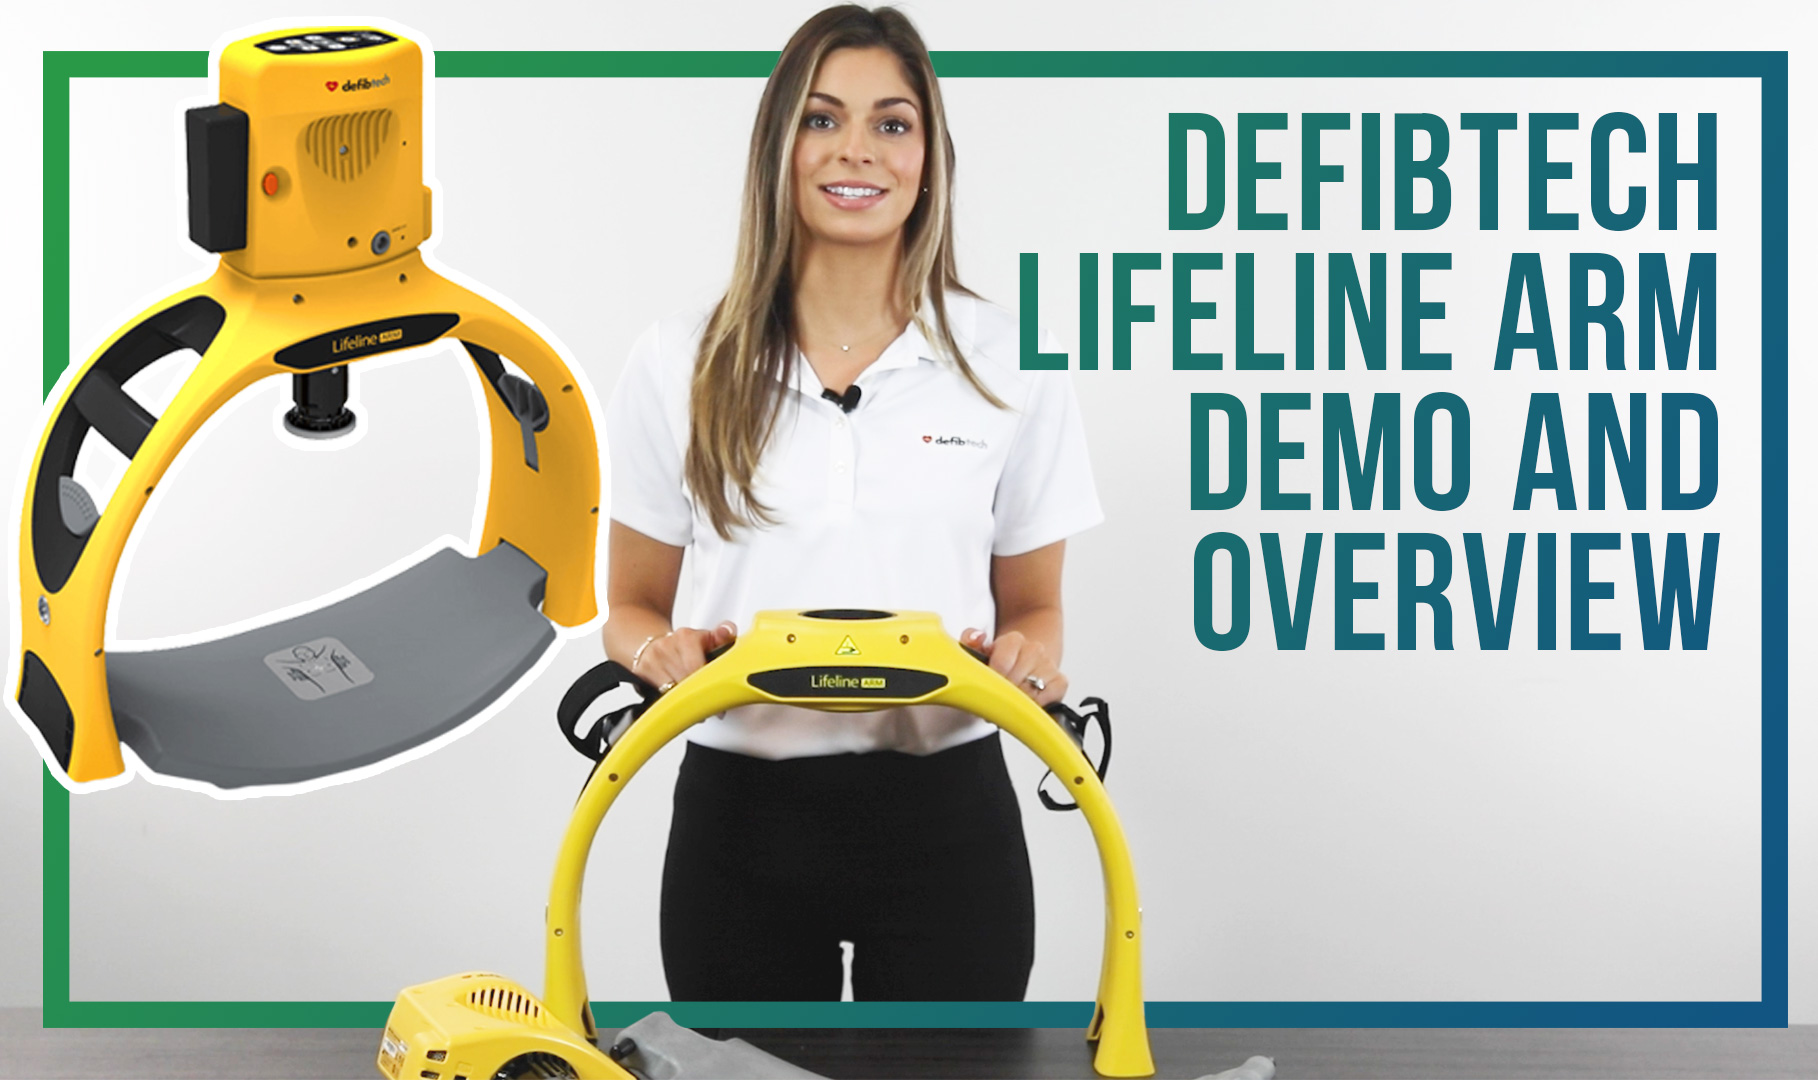 Automated Chest Compression Machines: Defibtech ARM Spotlight